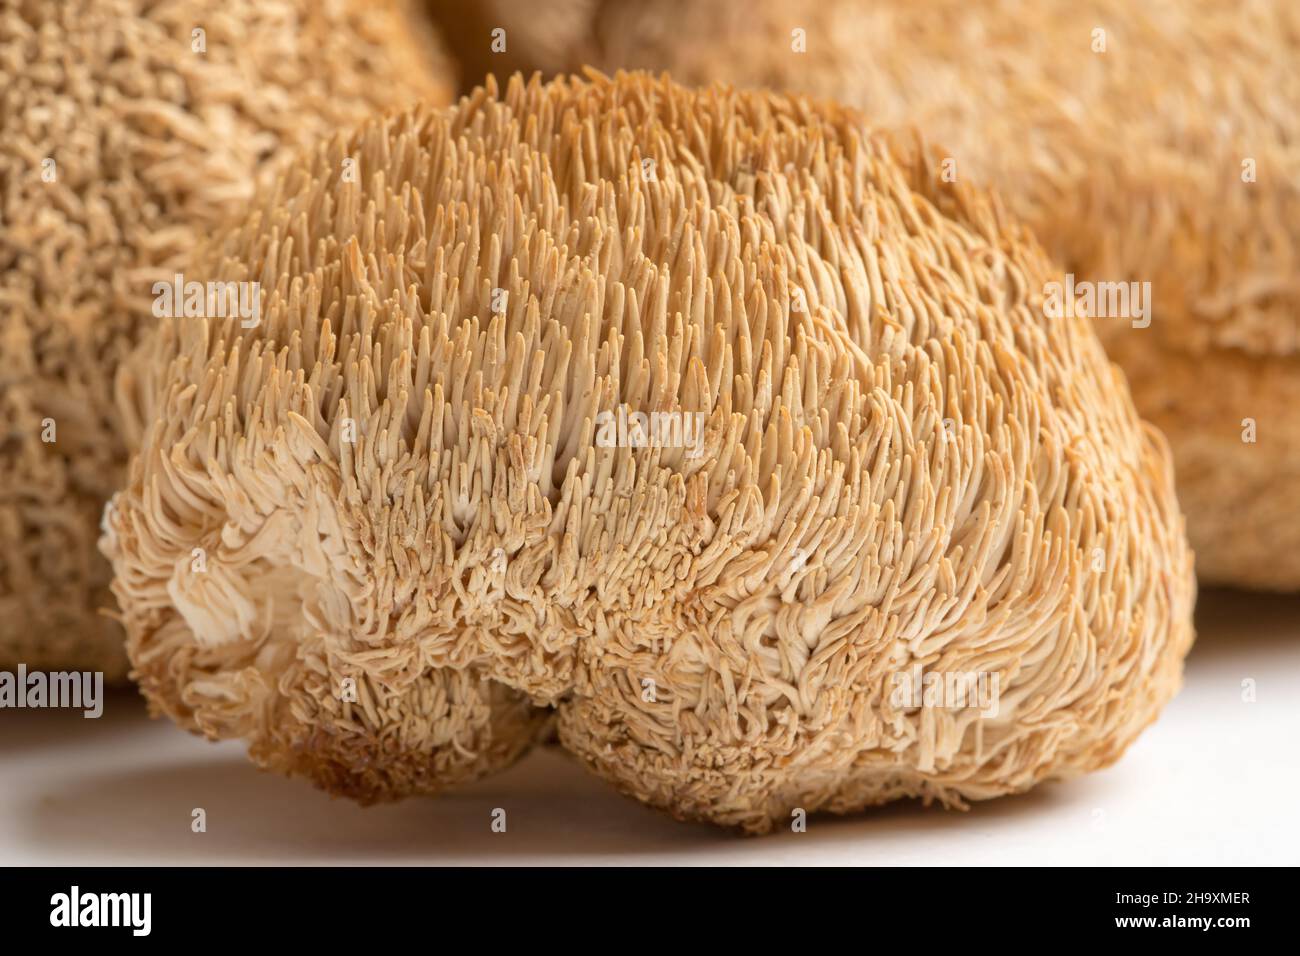 Dried Lion's Mane mushrooms or Hericium Erinaceus also called bearded tooth fungus. Stock Photo